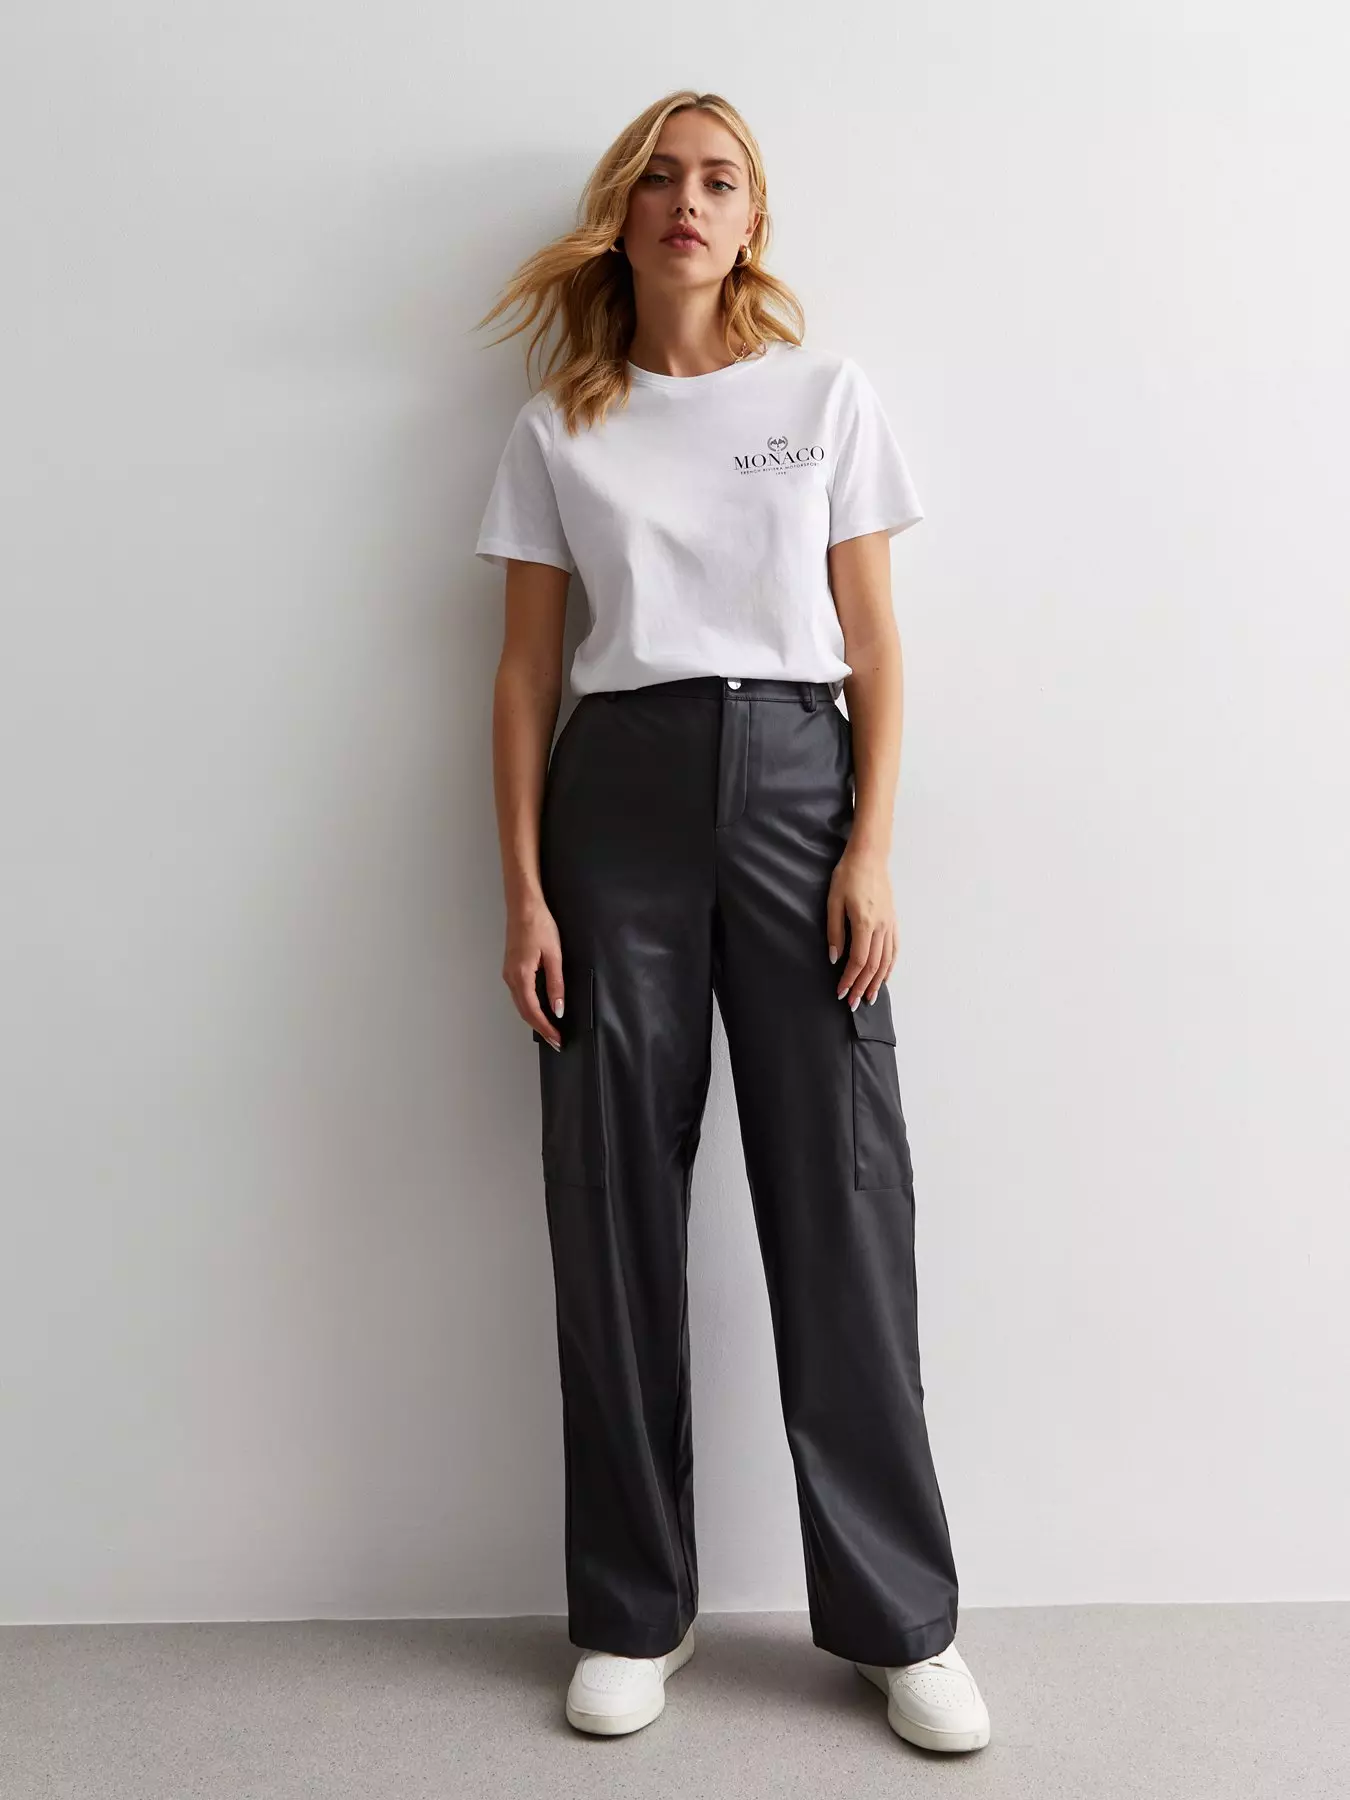 New Look Black Cotton Cuffed Cargo Trousers